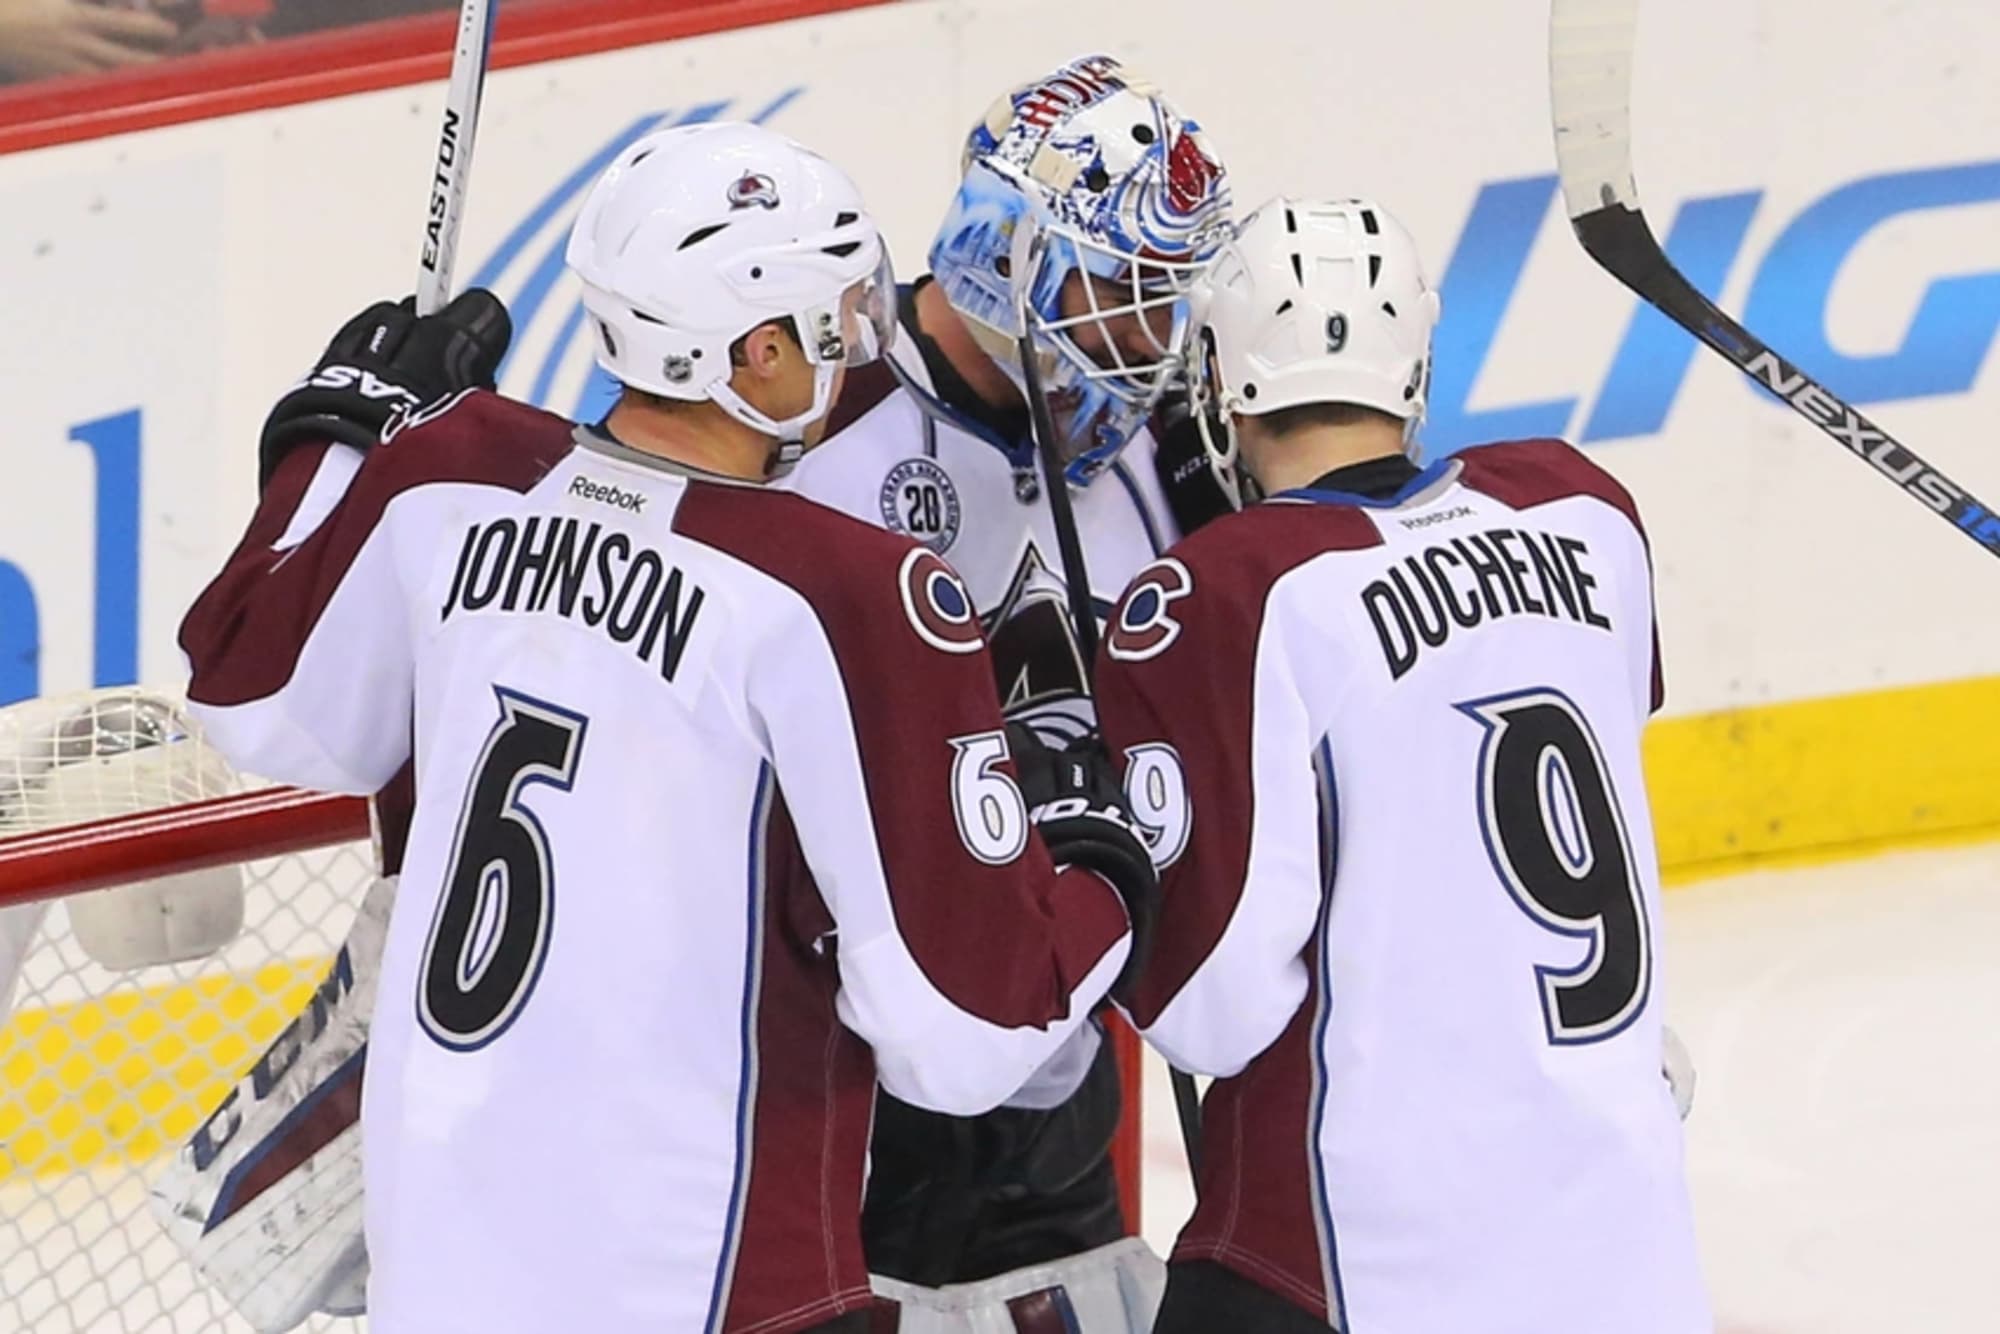 Tyson Barrie, Avalanche defenseman, is a core player whose game